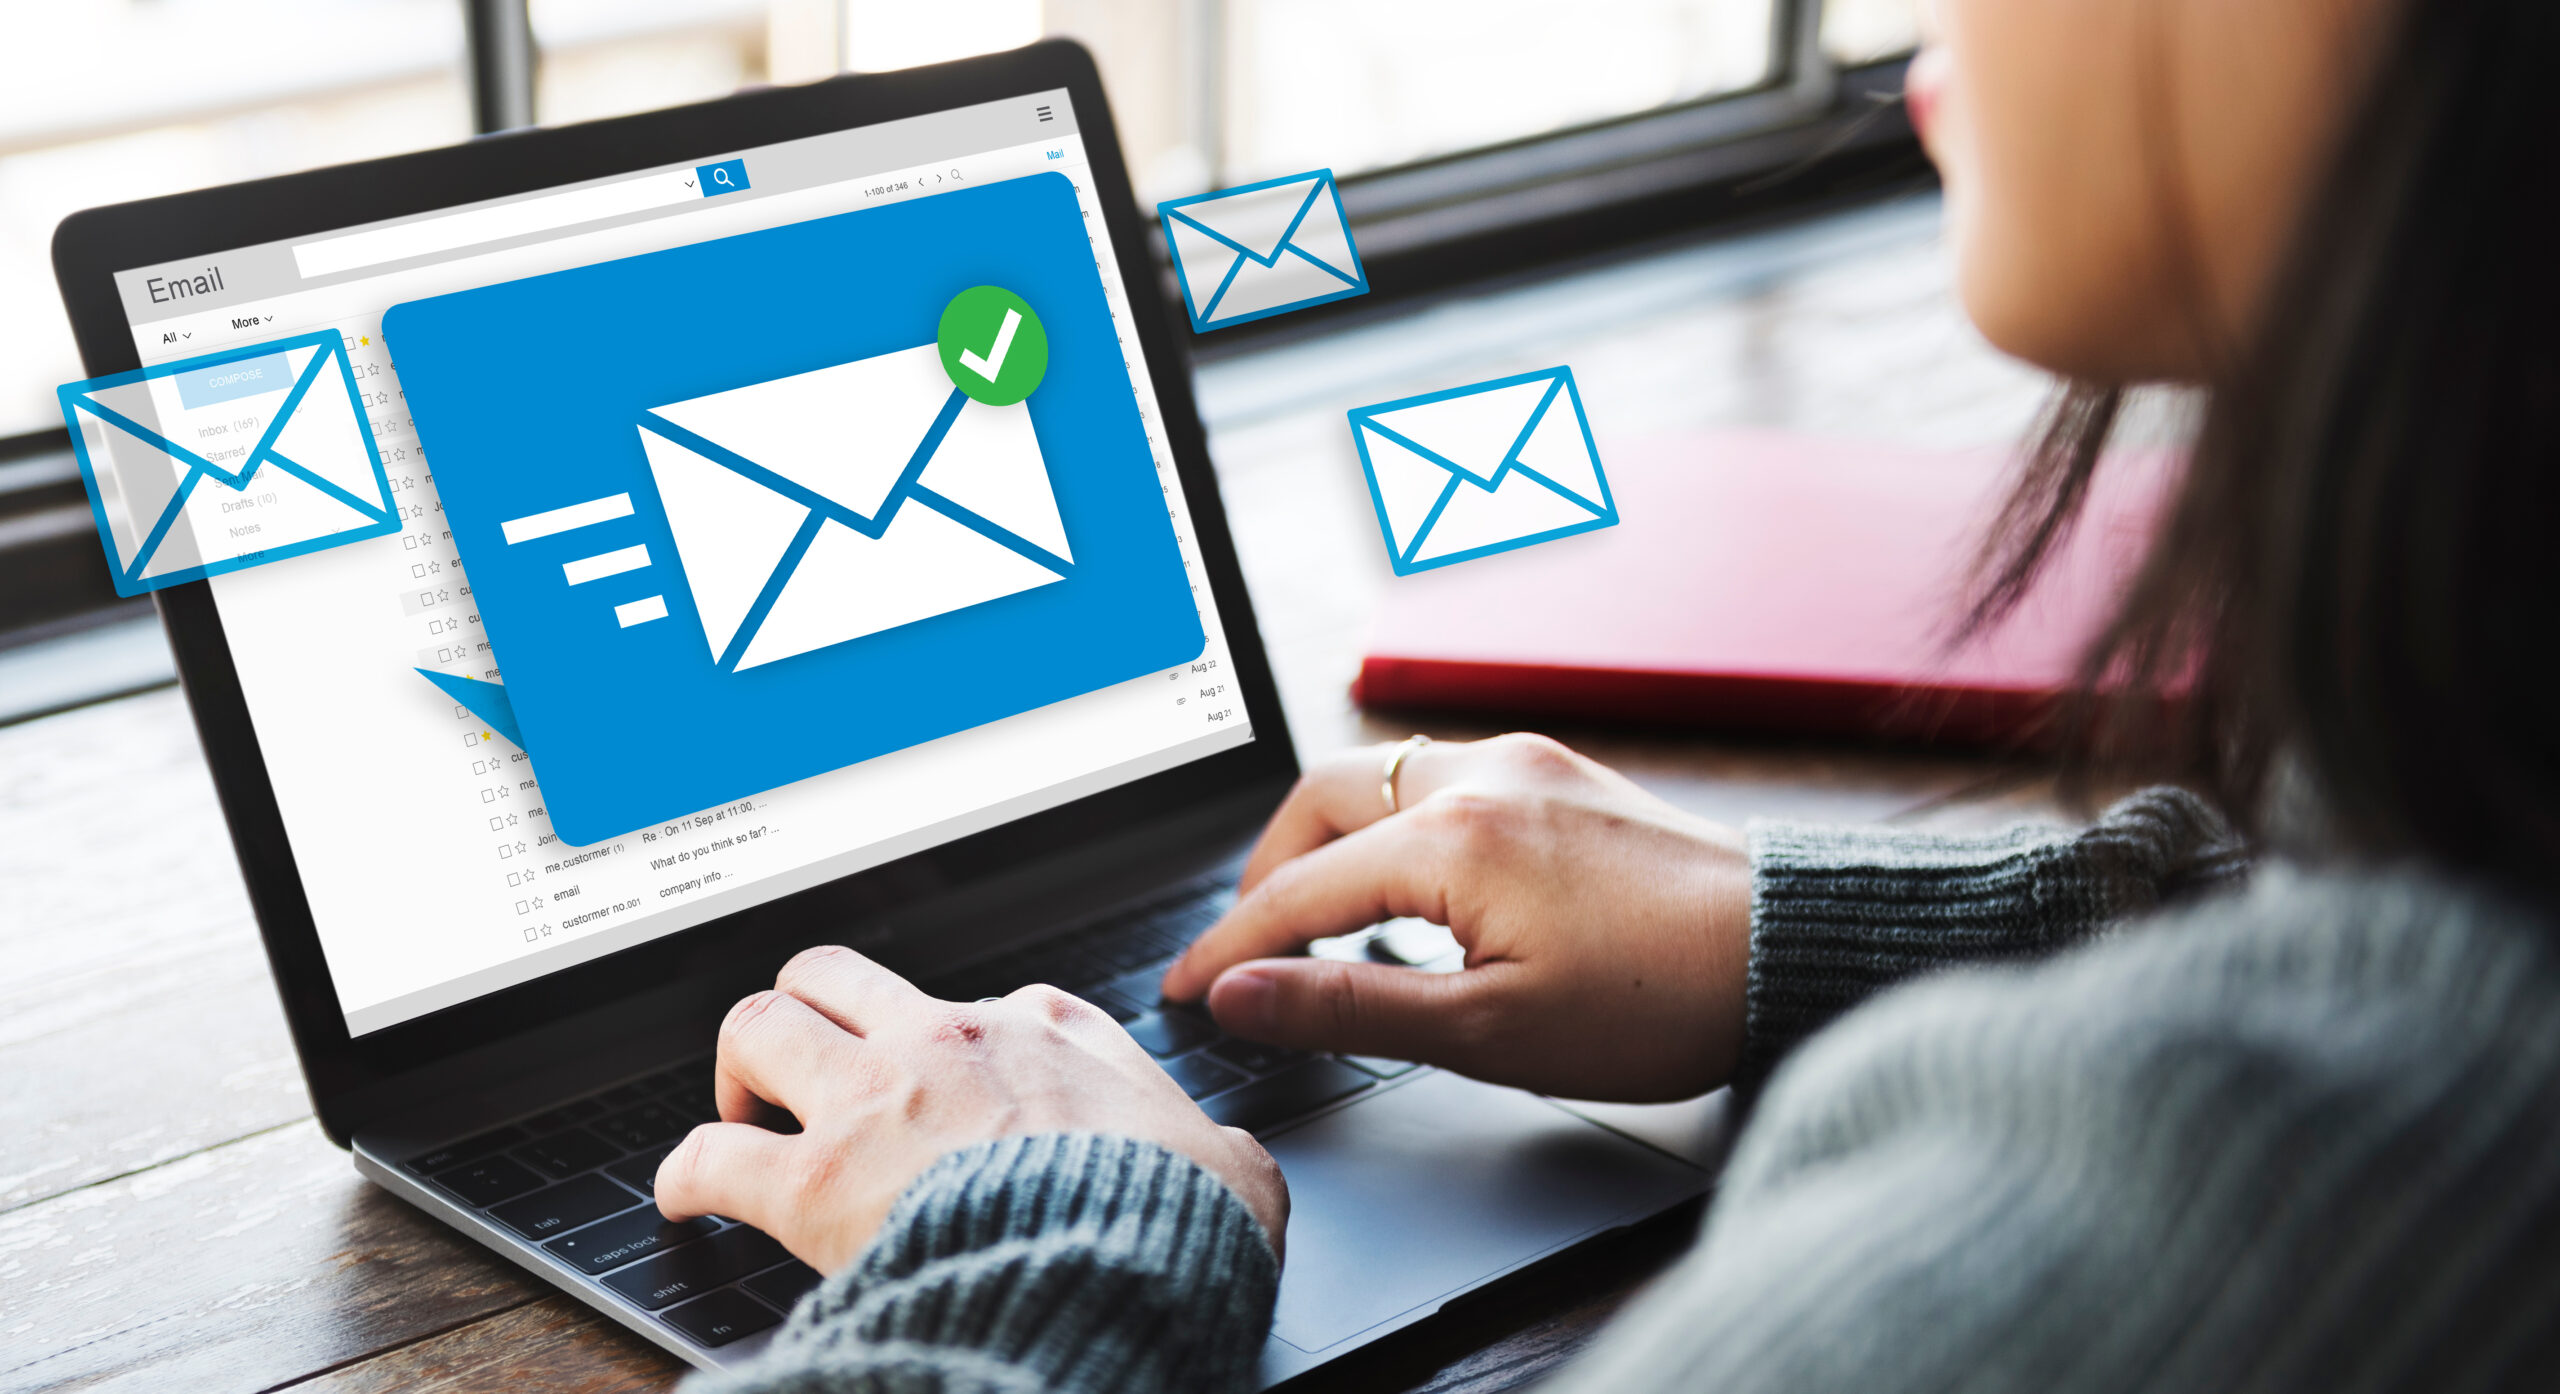 Proactive Email Security